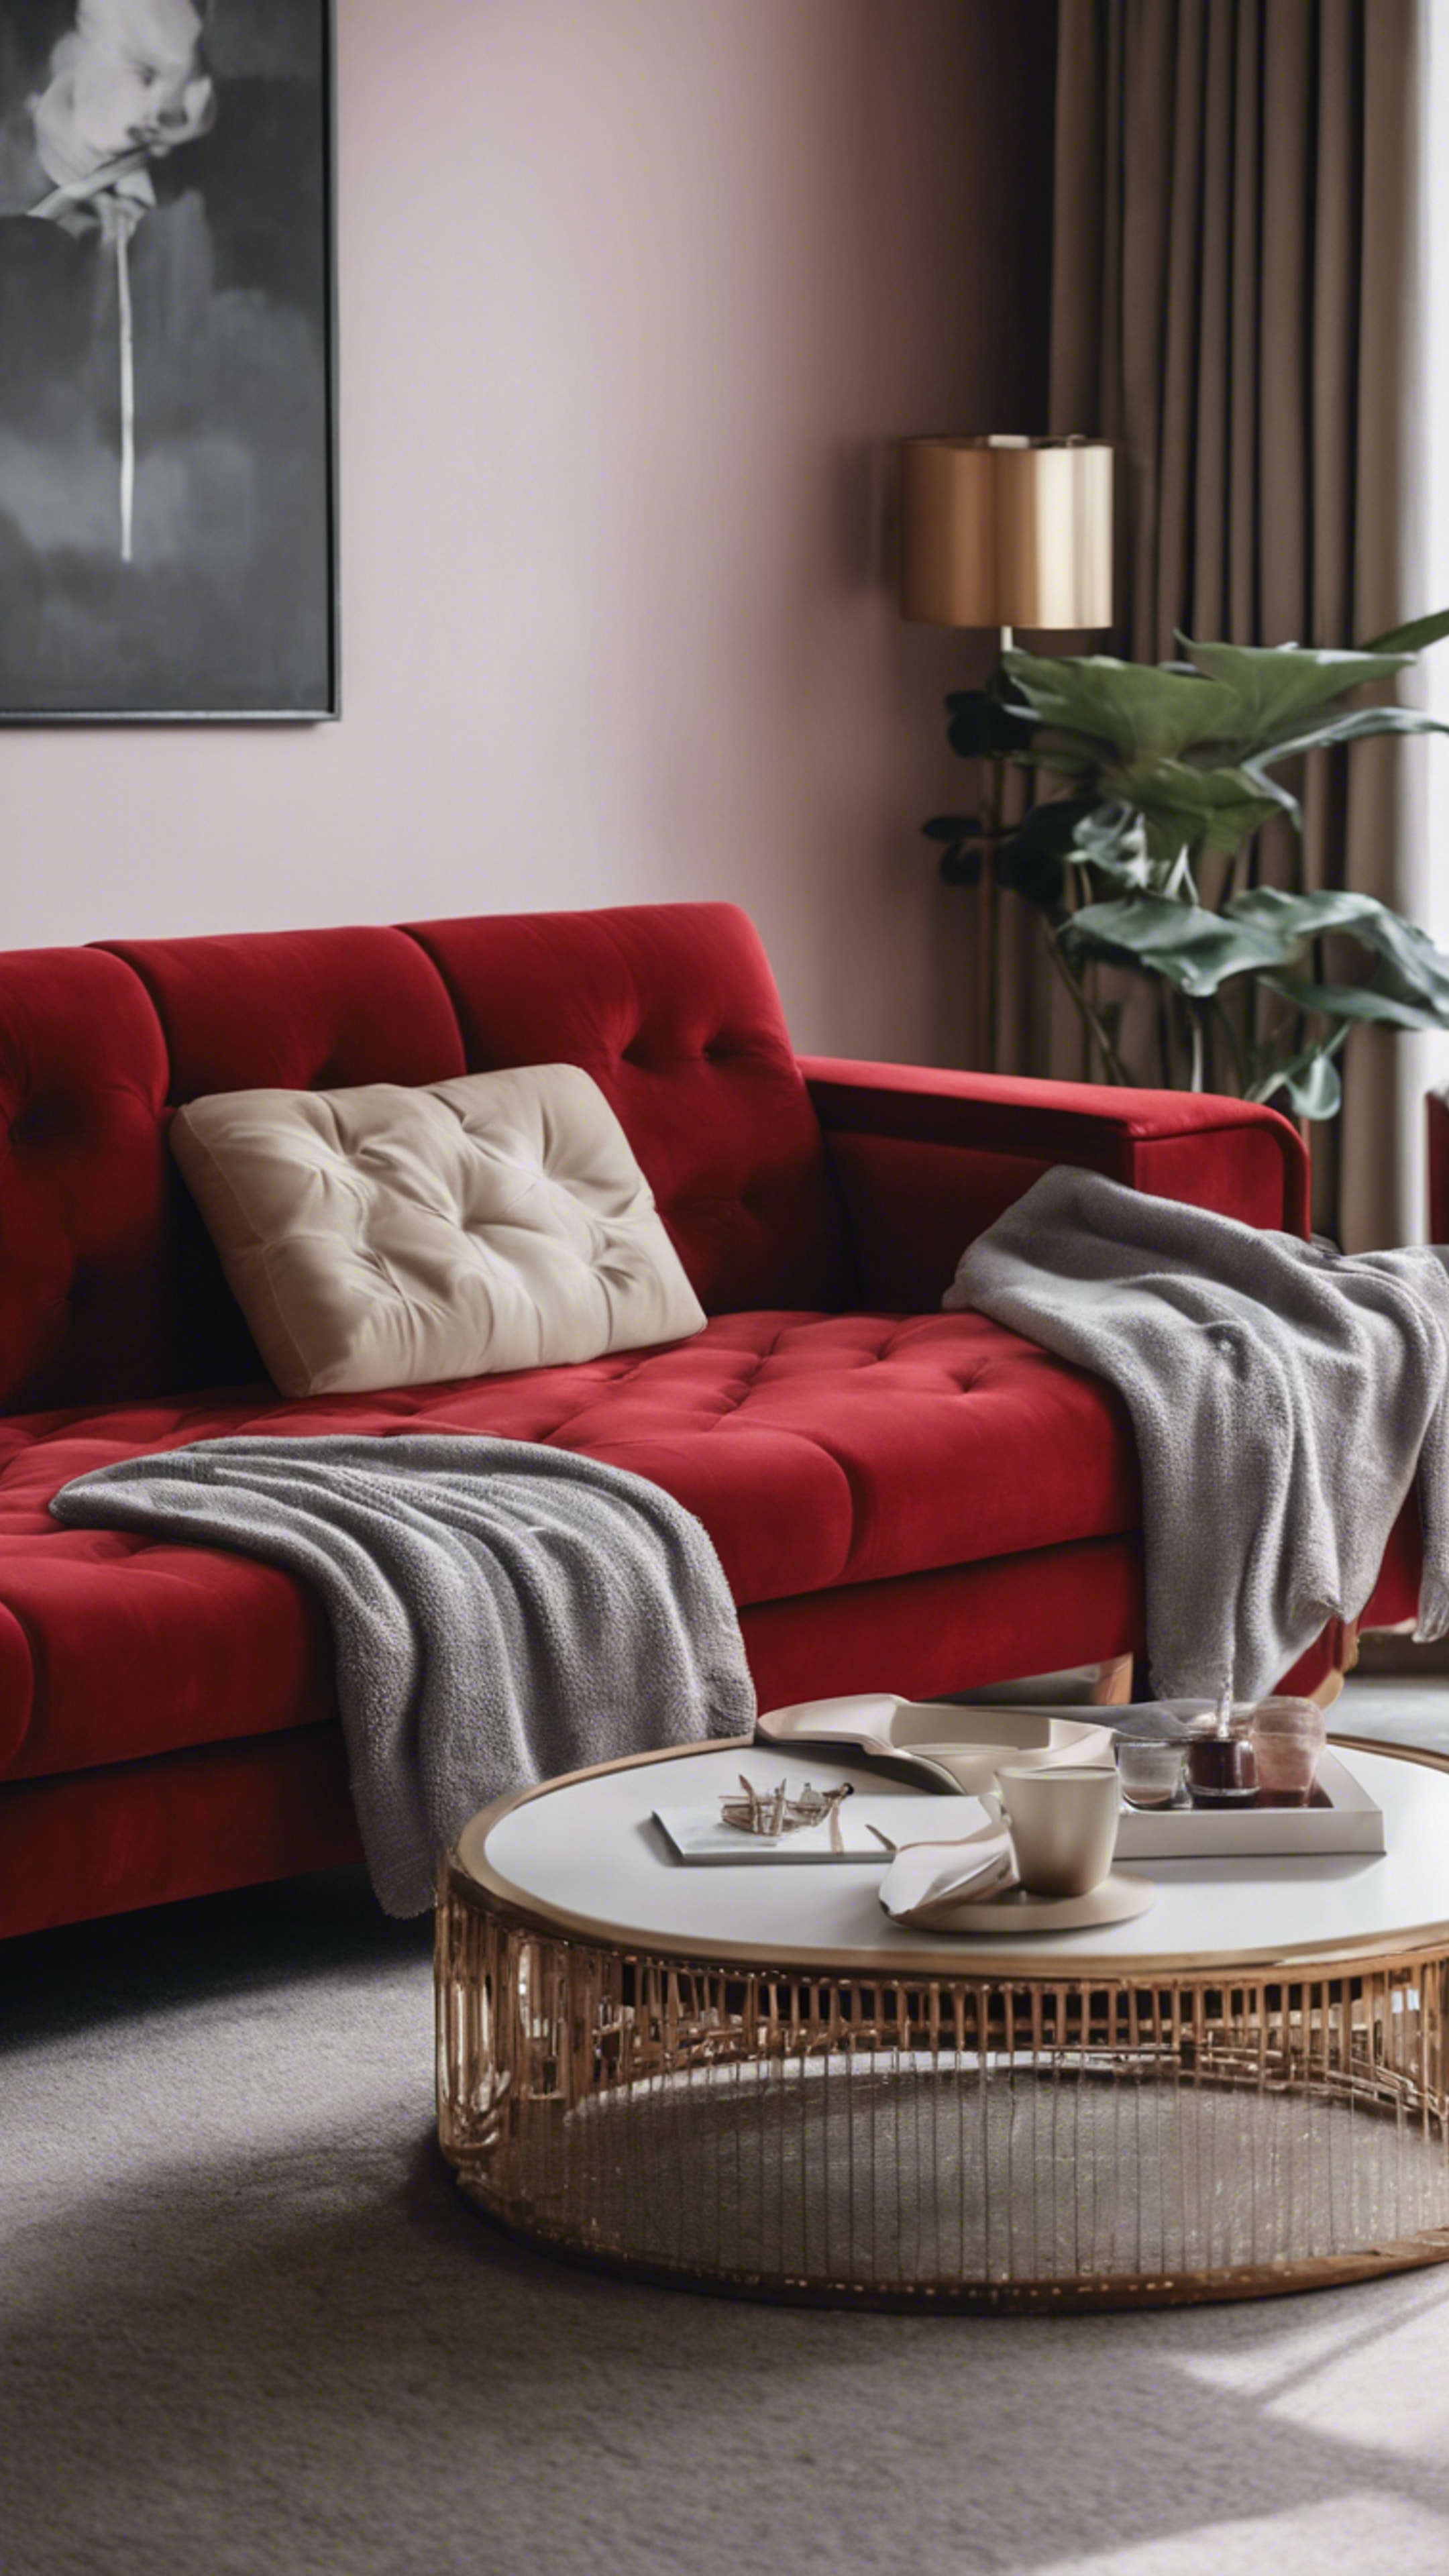 A luxurious red velvet sofa in a minimalistic modern living room, its color standing out in an otherwise neutral scene. Kertas dinding[9f5c54c2b7d04d069b86]